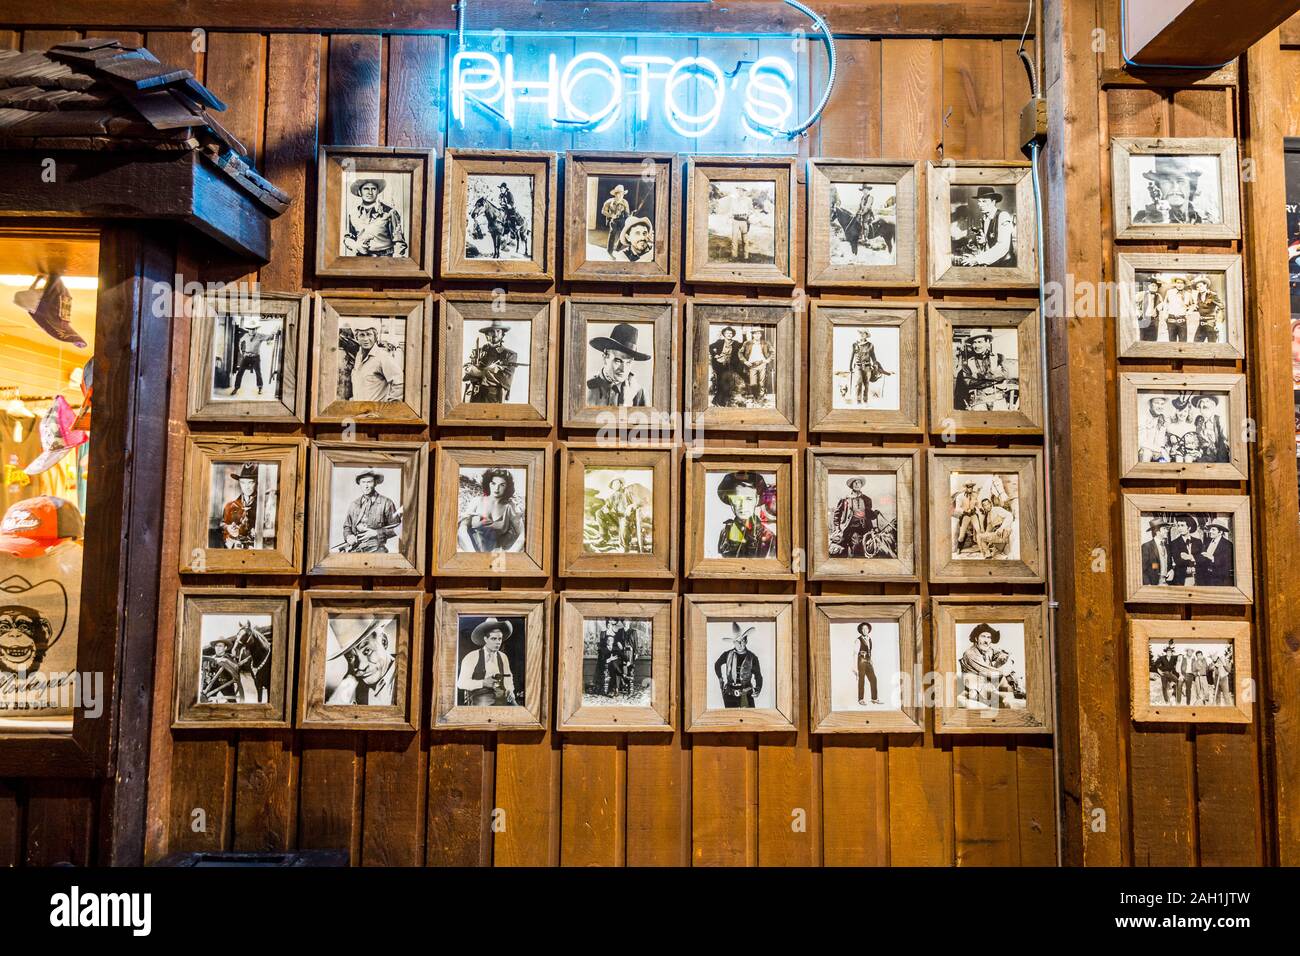 Interiors of  restaurants and bars with a lots of photos of celebrities  at the Fort Worth Stockyards, a historic district that is located in Fort Wor Stock Photo